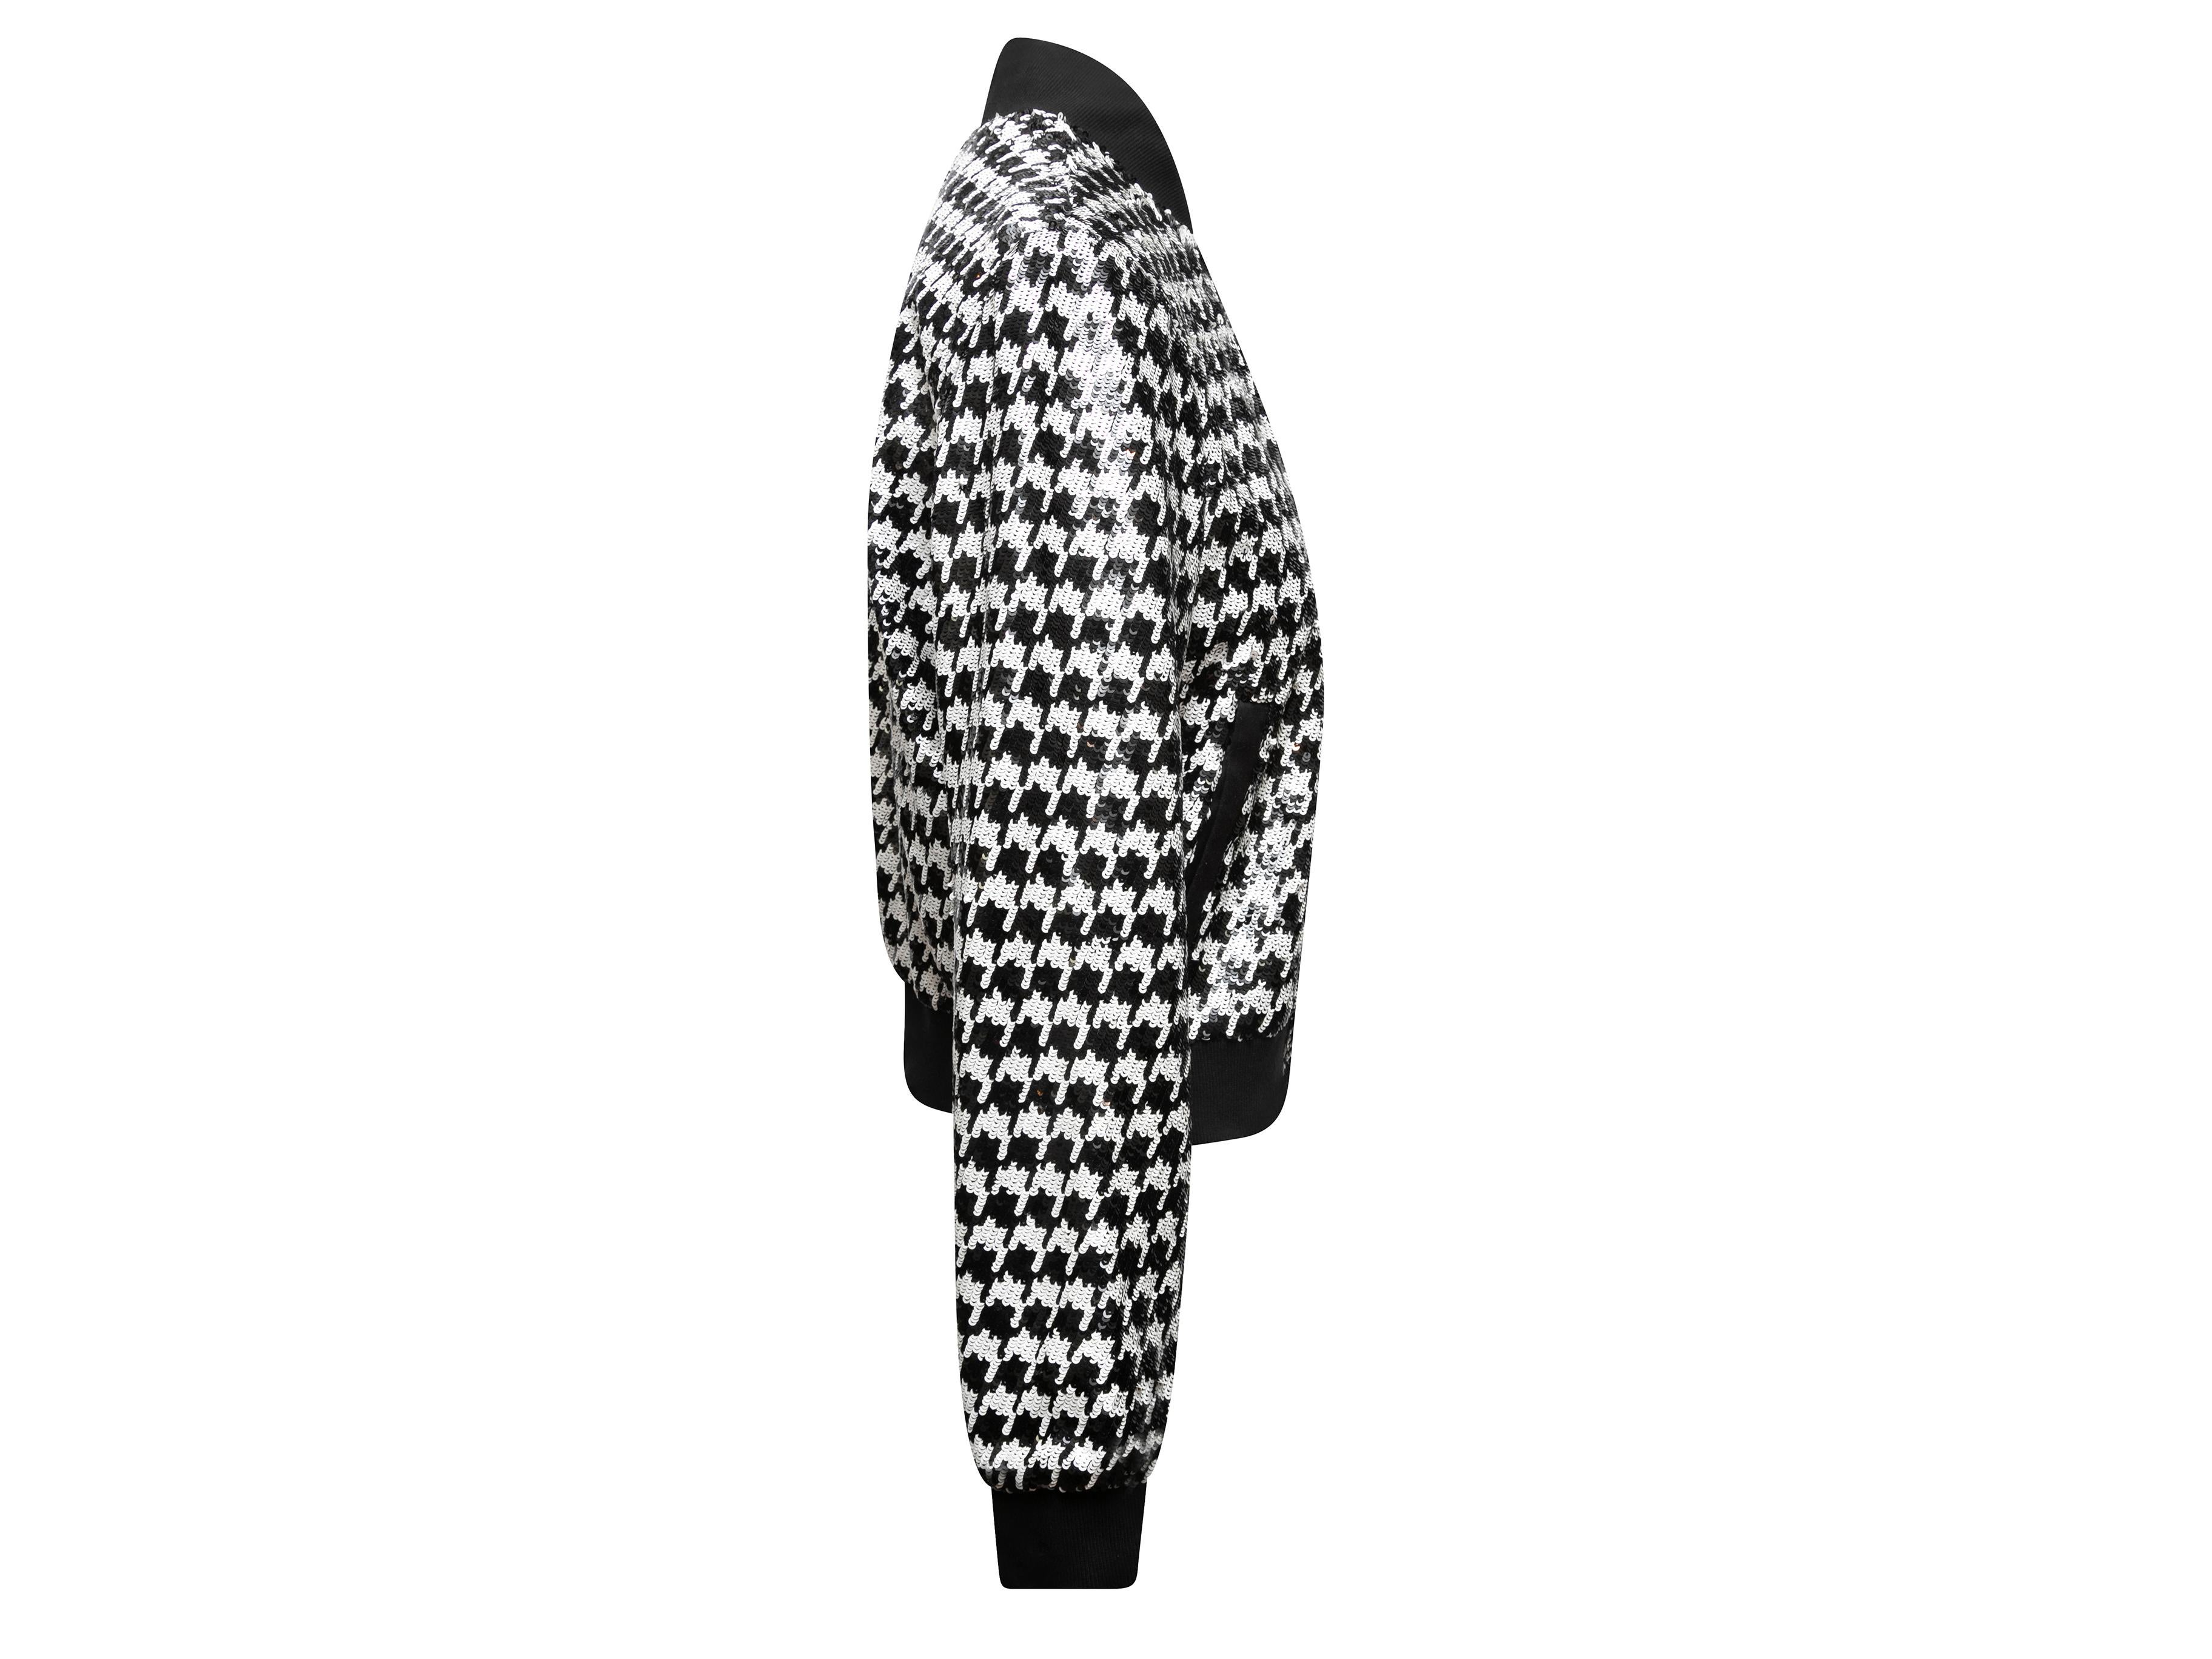 Black & White Alice + Olivia Sequined Houndstooth Jacket Size US S In Good Condition For Sale In New York, NY